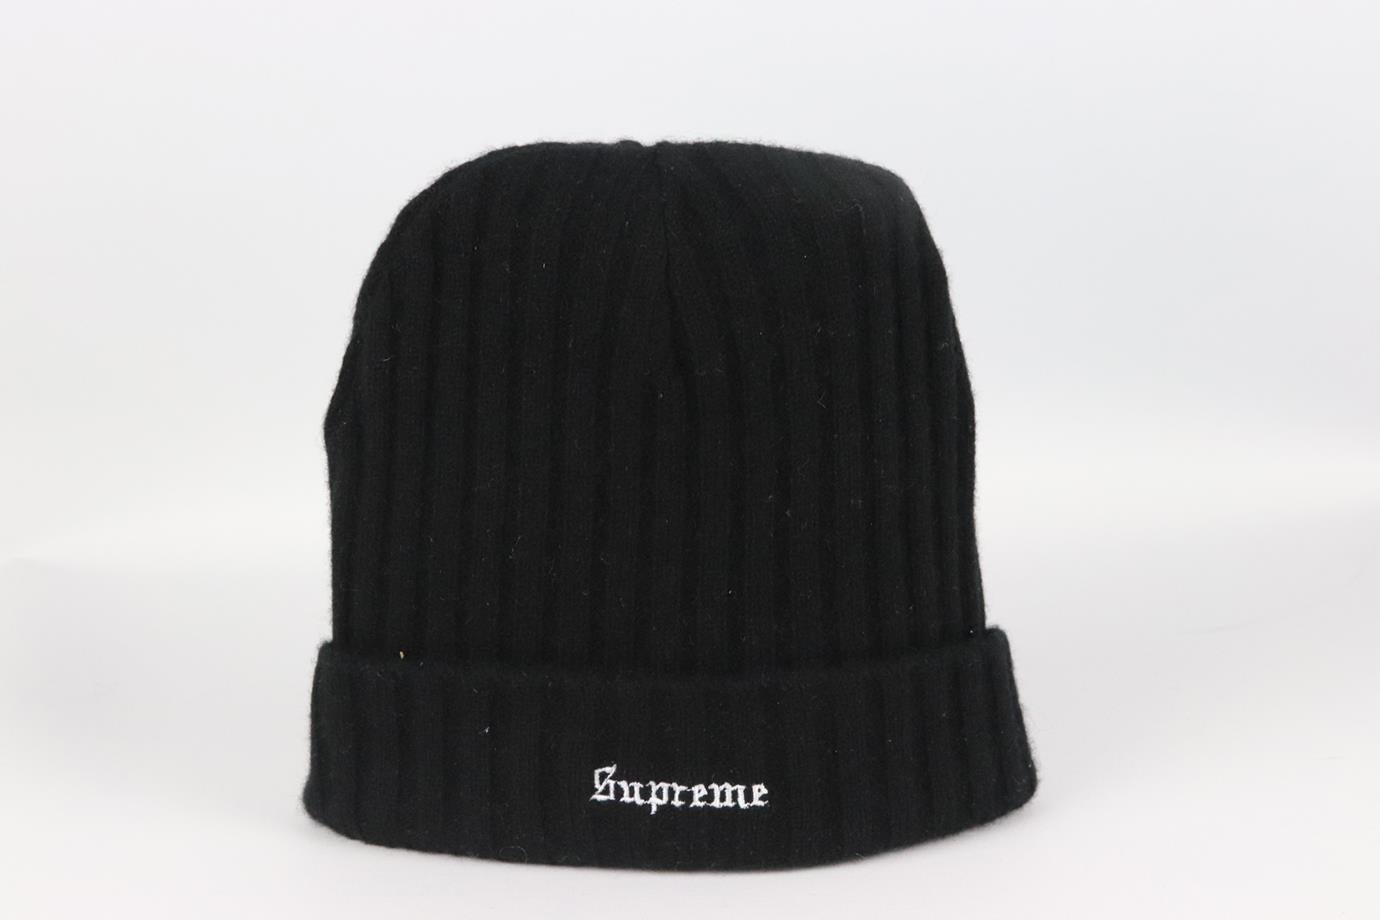 Supreme embroidered ribbed cashmere beanie. Black. Slips on. 100% Cashmere. Does not come with dustbag or box. Size: One Size. Length: 8.25 in. Circumference: 19 in. Very good condition - As new condition, no sign of wear; see pictures.